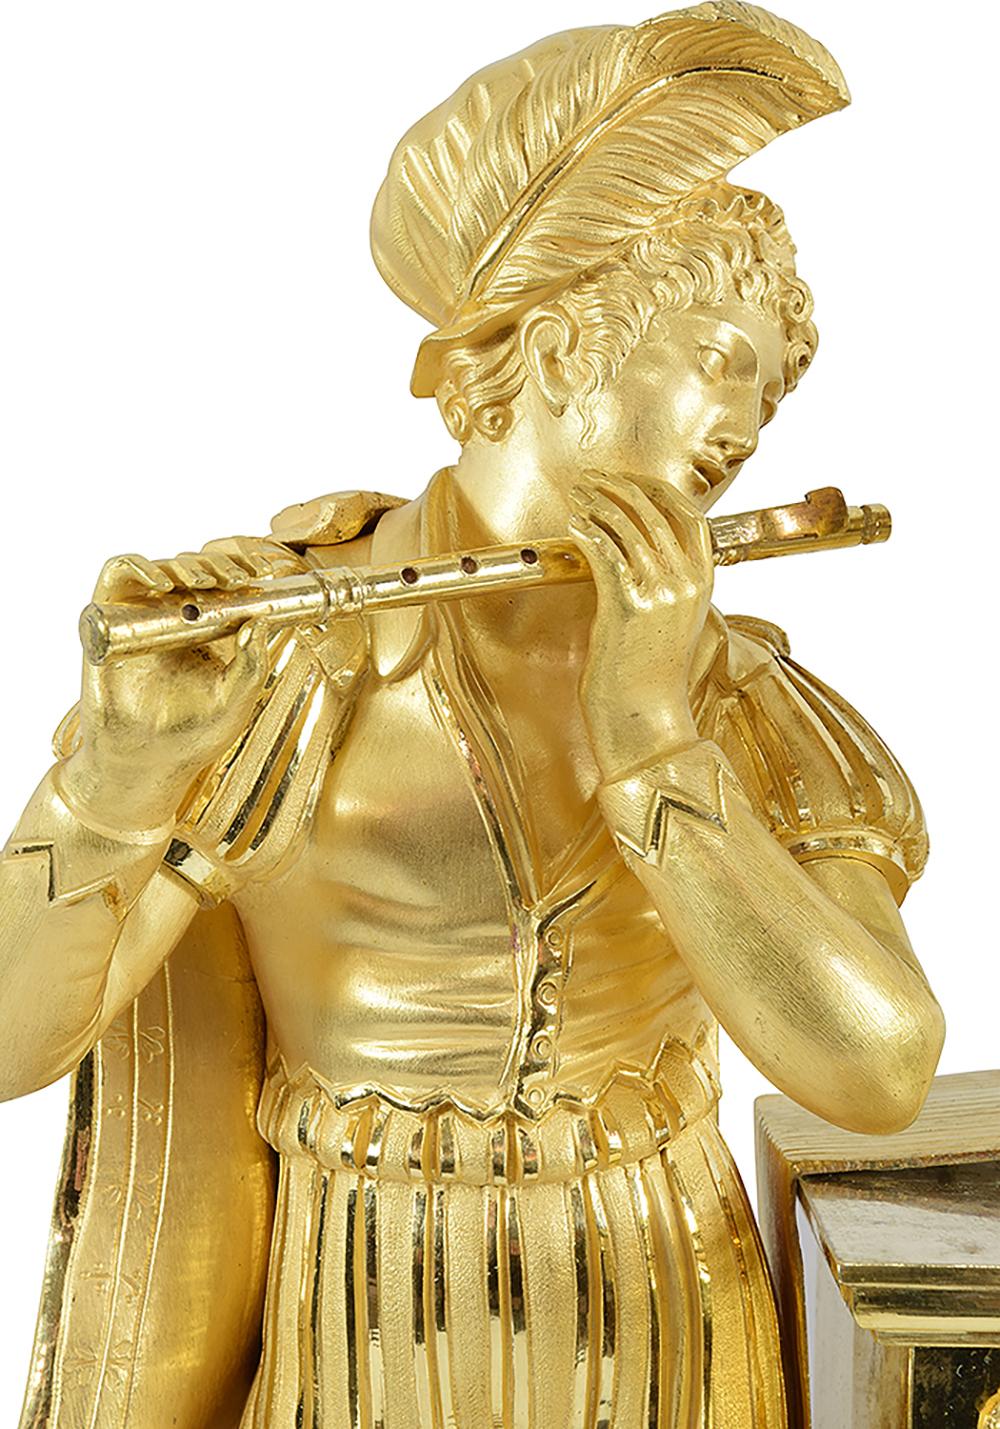 Empire period clock in gilded bronze with mercury on the main theme of the troubadour. in the style of the Renaissance with a decoration of a large character, finely chiseled wearing a typical costume of the time, playing the flute. His gaze turns